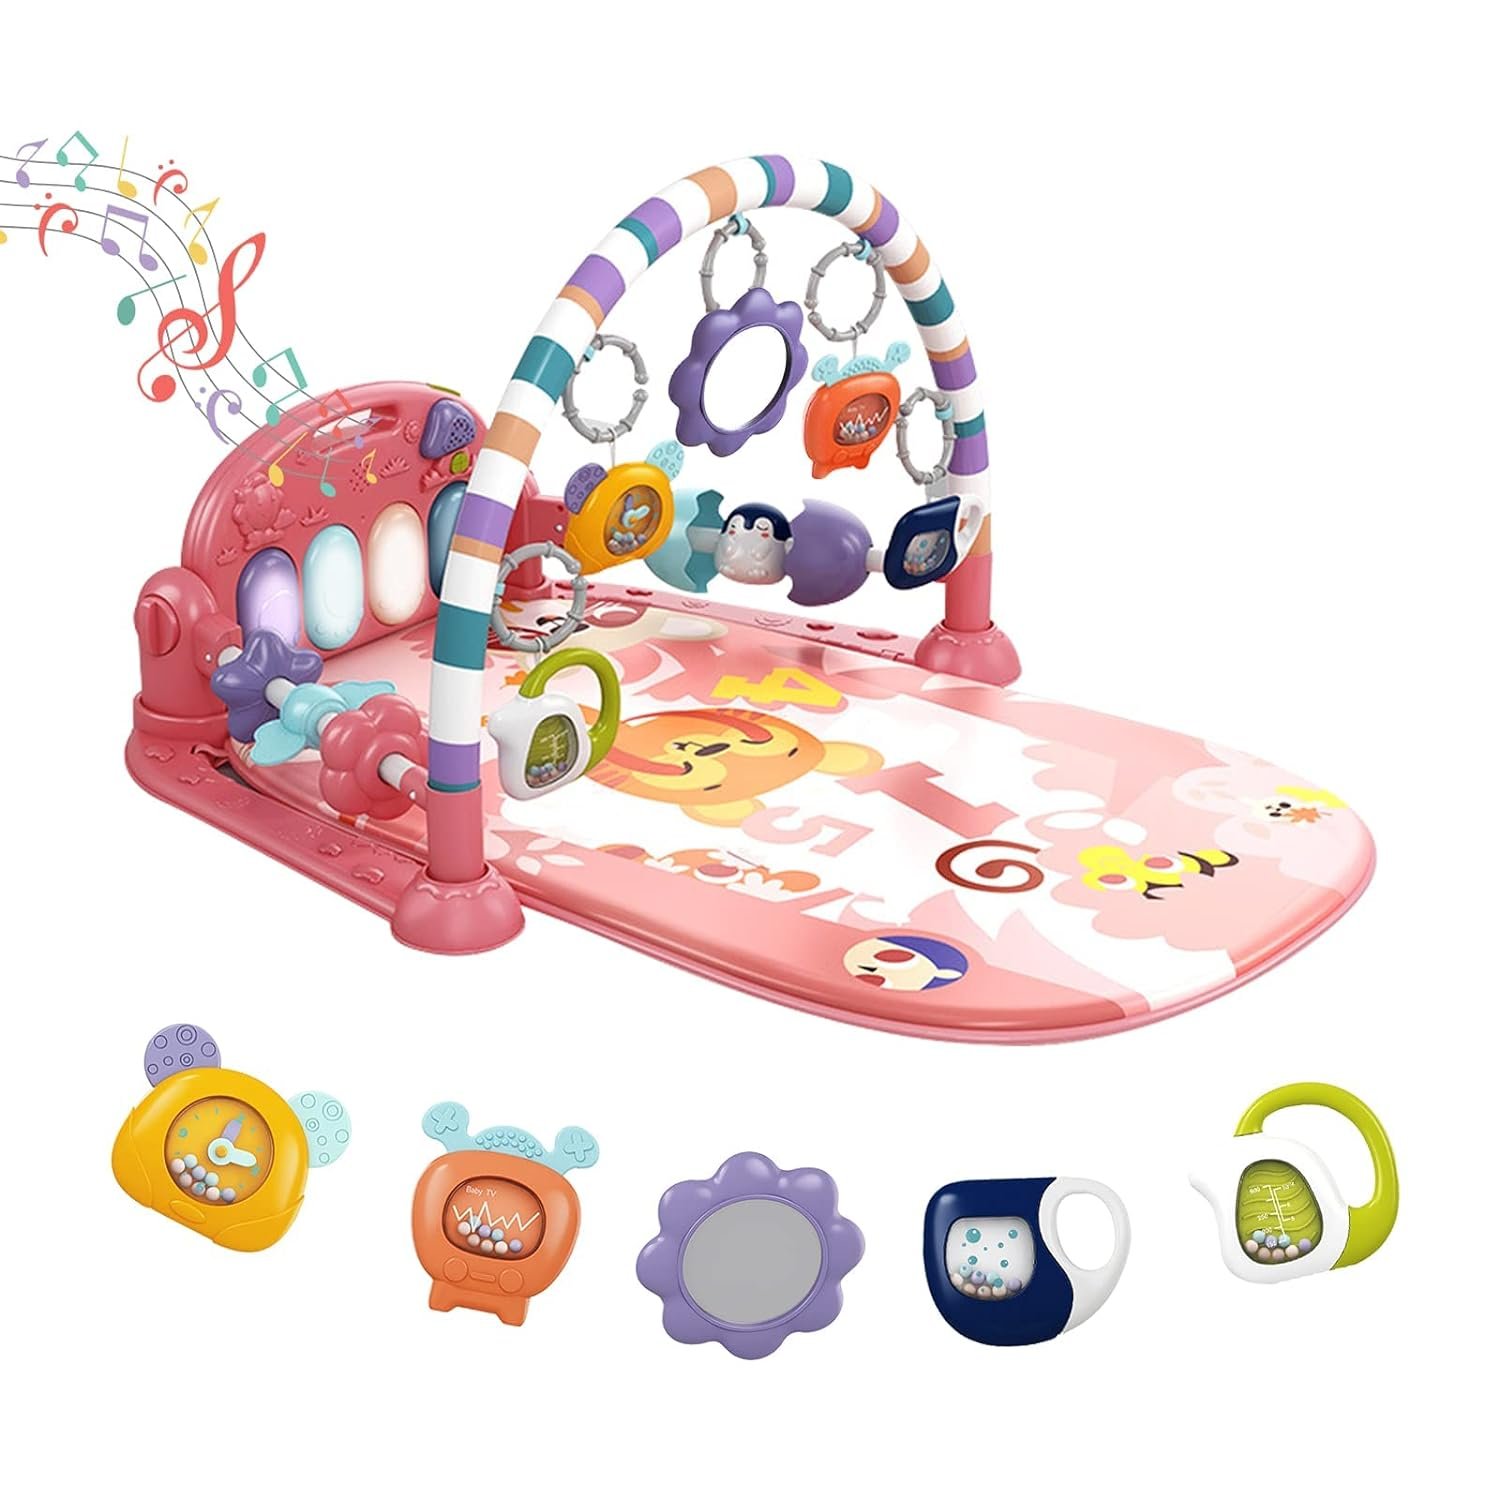 Baby Play Mat Baby Gym,Funny Play Piano Tummy Time Baby Activity Gym Mat with 5 Infant Learning Sensory Baby Toys, Music and Lights Boy  Girl Gifts for Newborn Baby 0 to 3 6 9 12 Months (Pink)